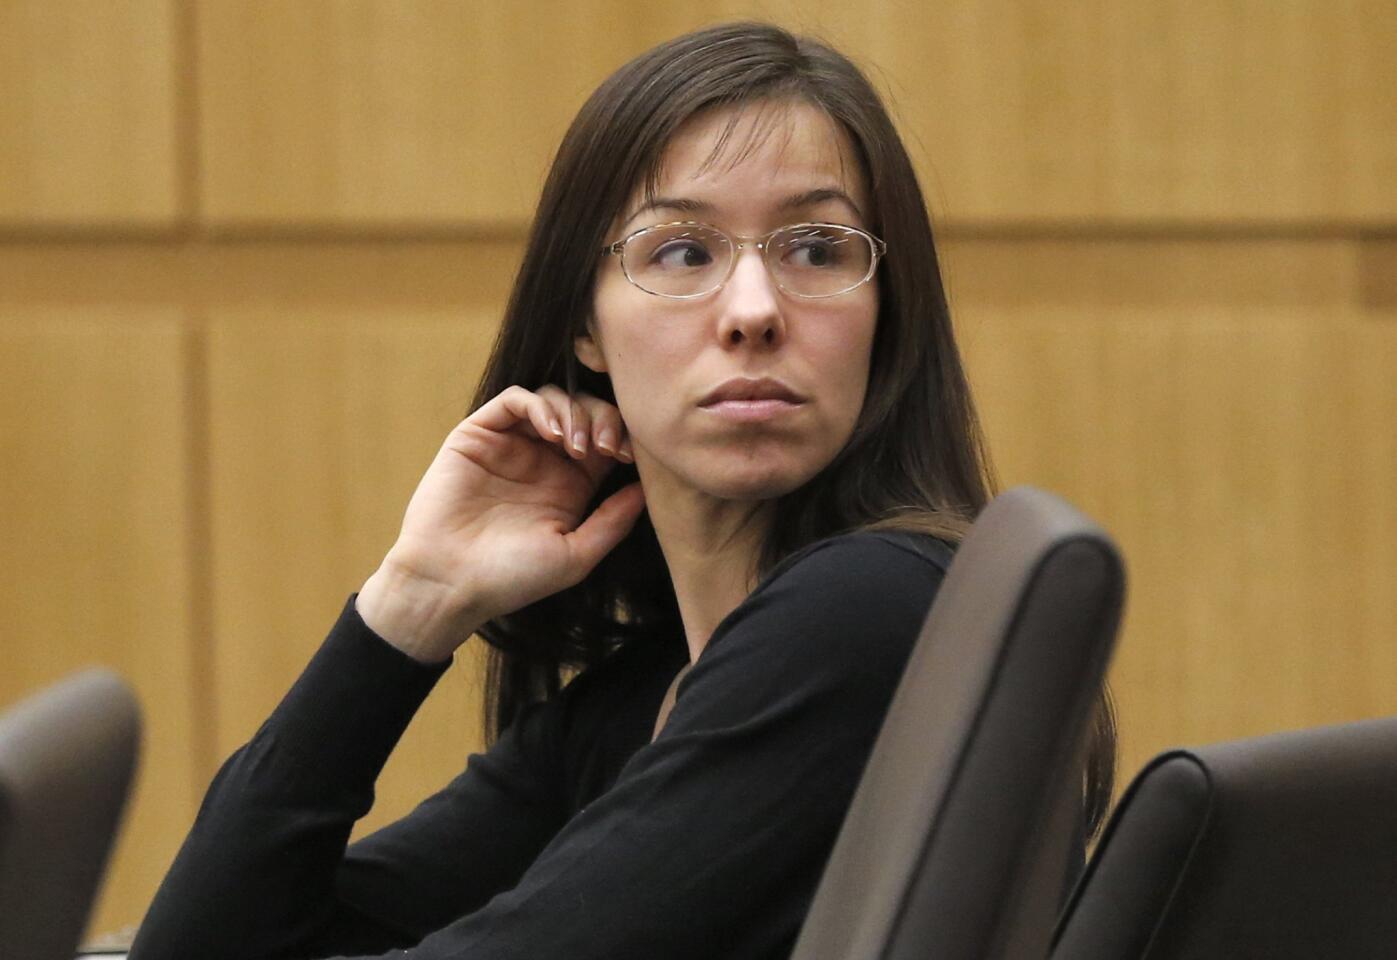 Jodi Arias appears for her trial in Maricopa County Superior court in Phoenix.